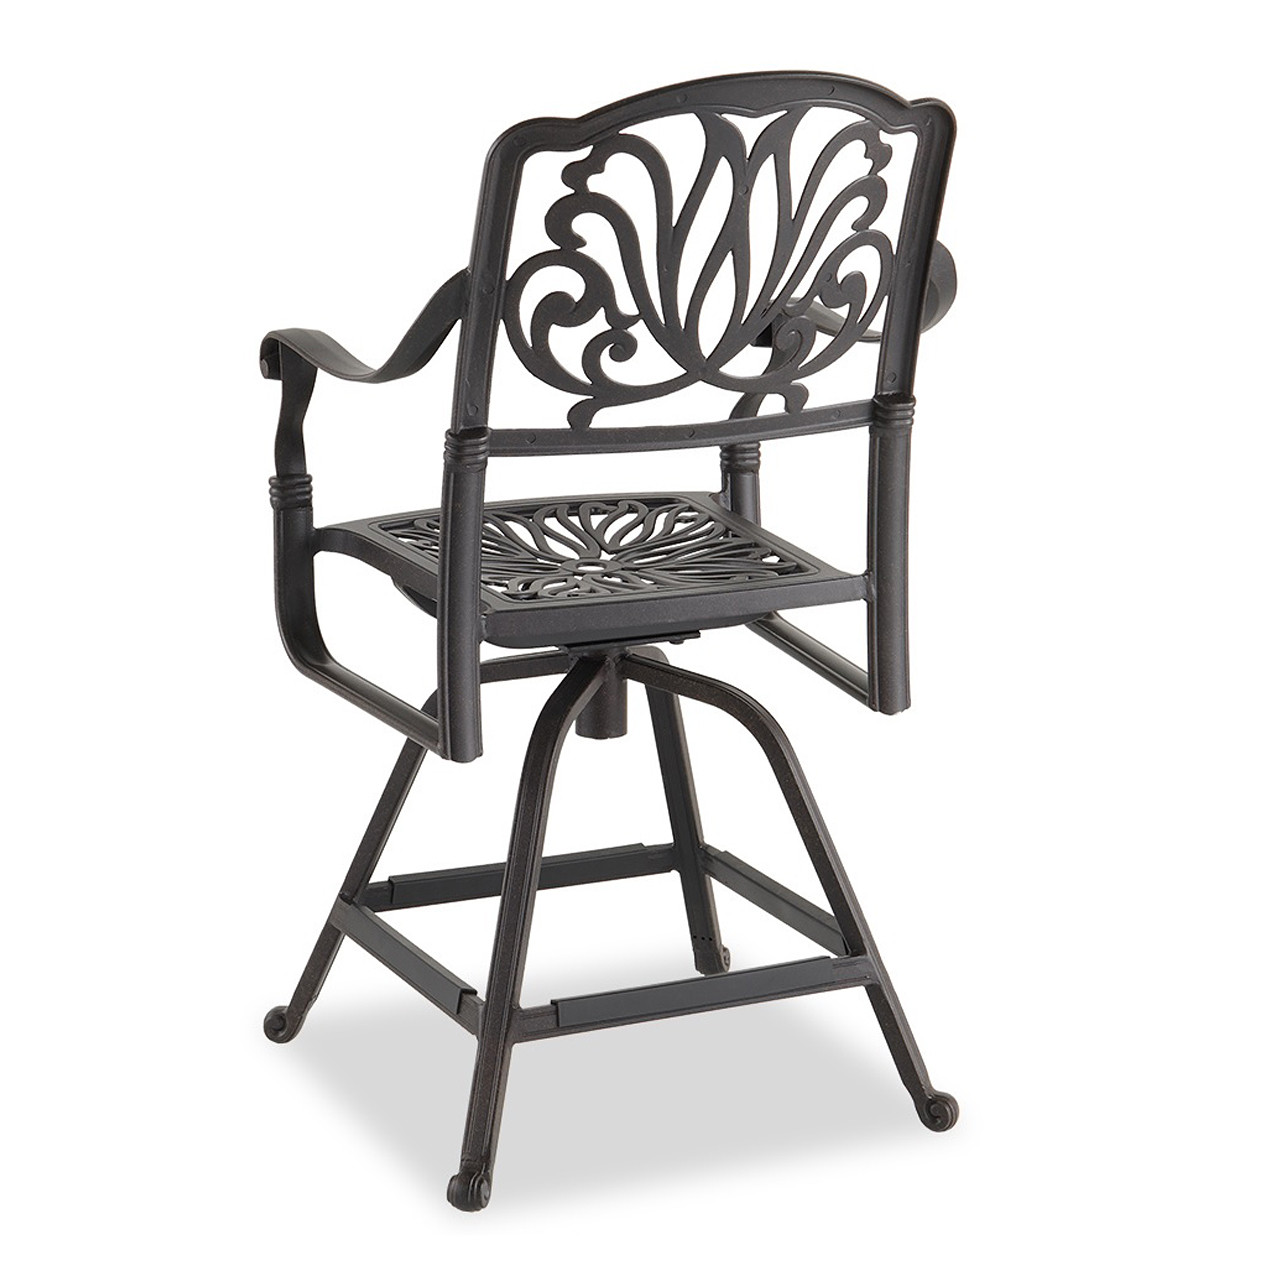 Cadiz Aged Bronze Cast Aluminum and Cushion 7 pc. Gathering Height Dining Set with 72 x 42 in. Table